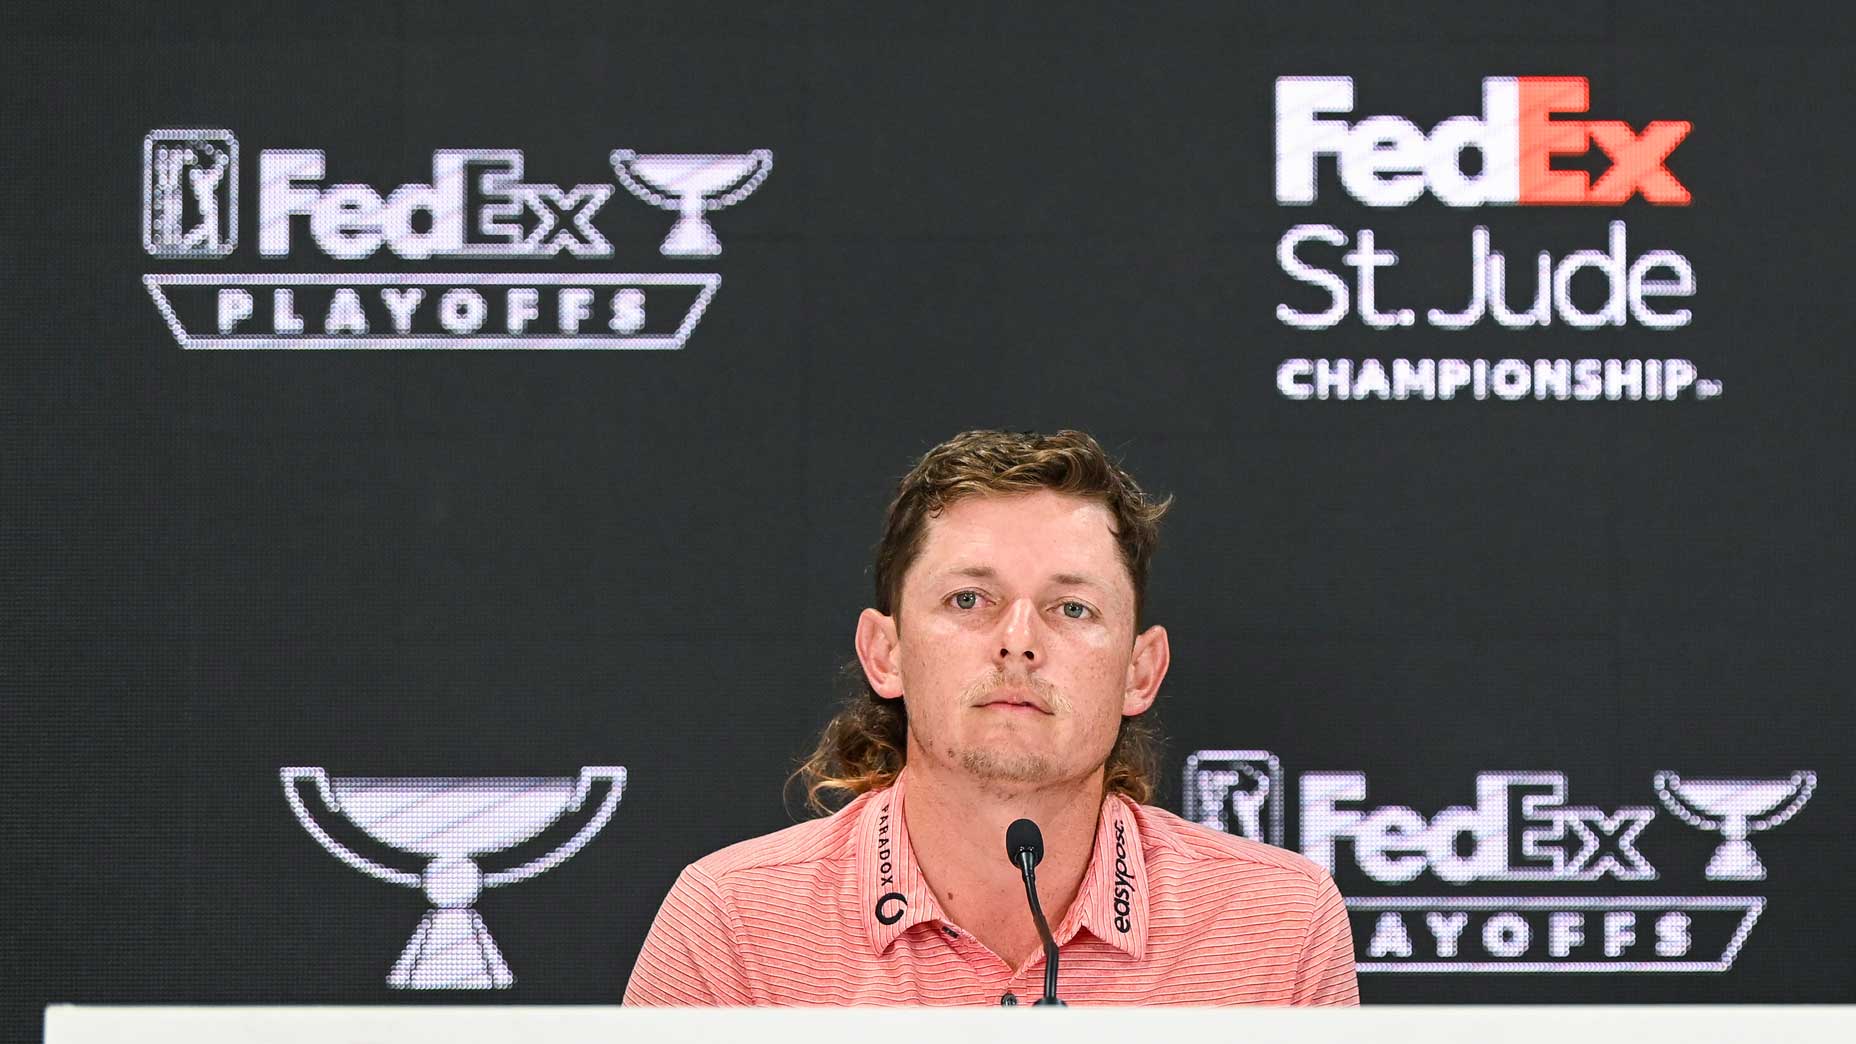 Cameron Smith spoke with the media on Tuesday at the FedEx St. Jude Championship.